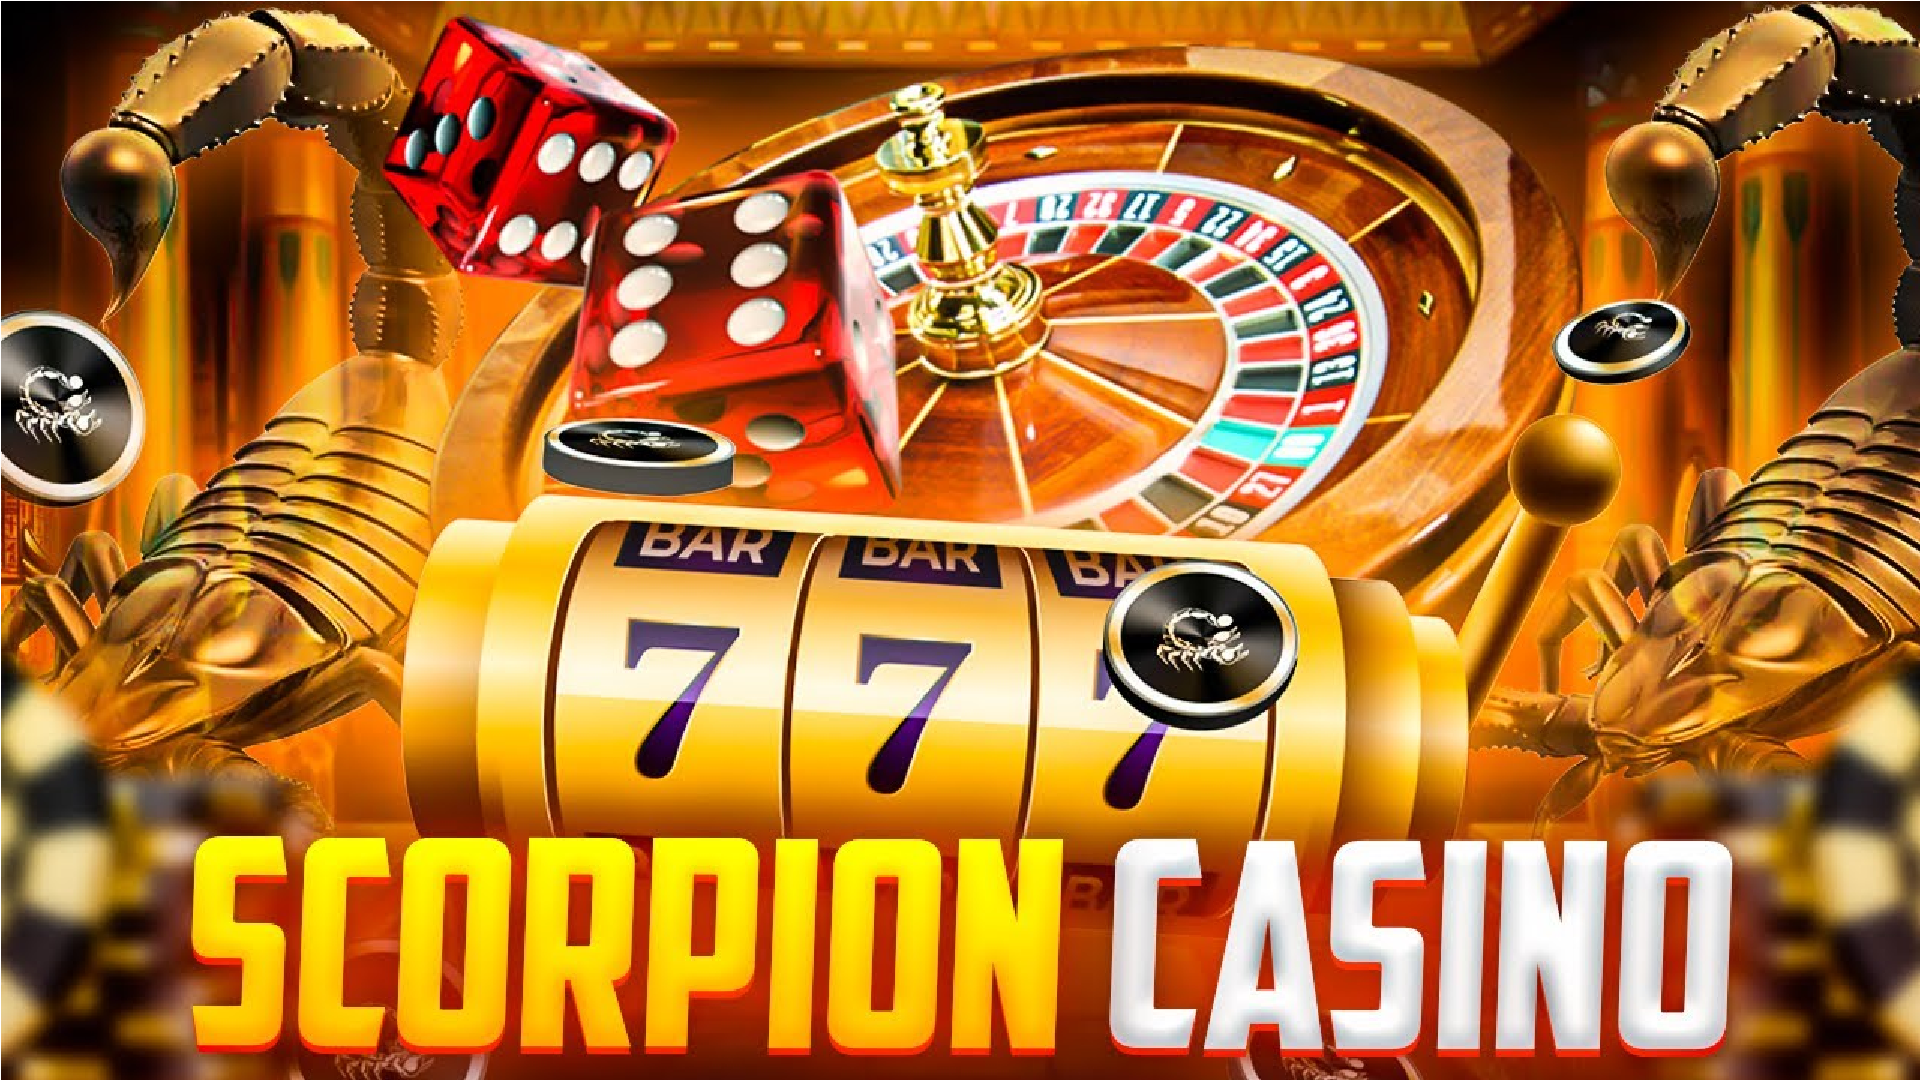 Scorpion-Casino-Set-To-Explode-At-Launch